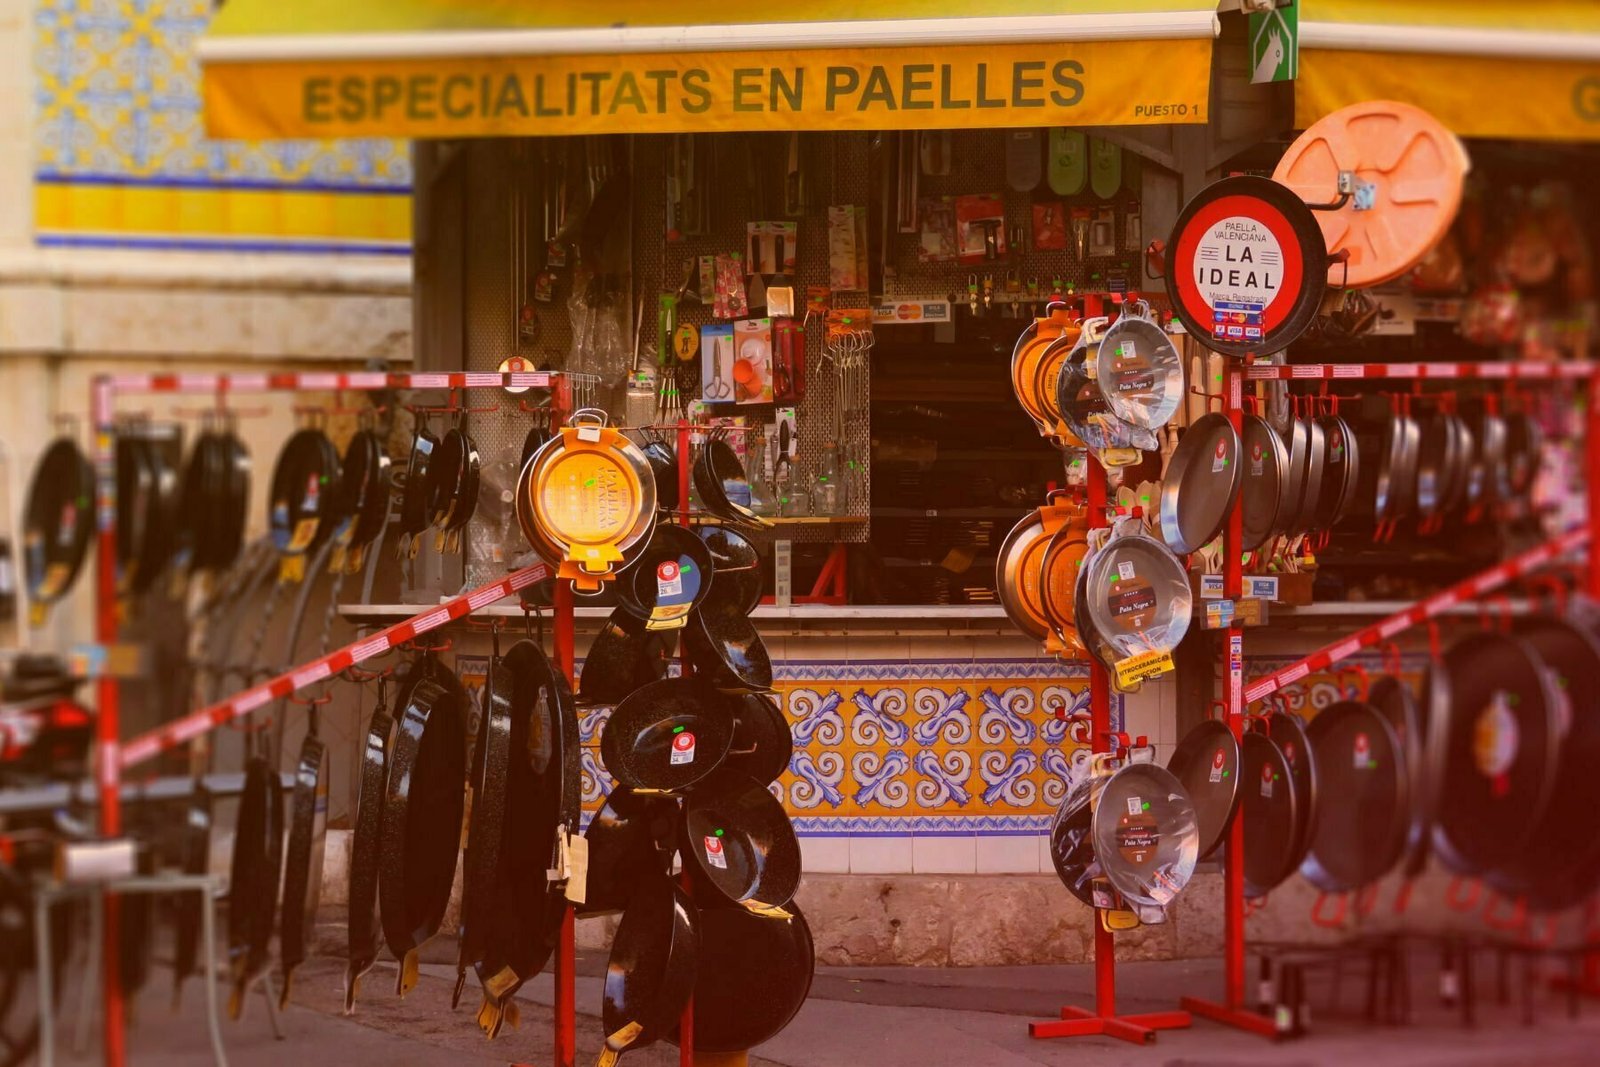 A street scene showing a traditional paella shop selling a rnage of paella pans and cokking items